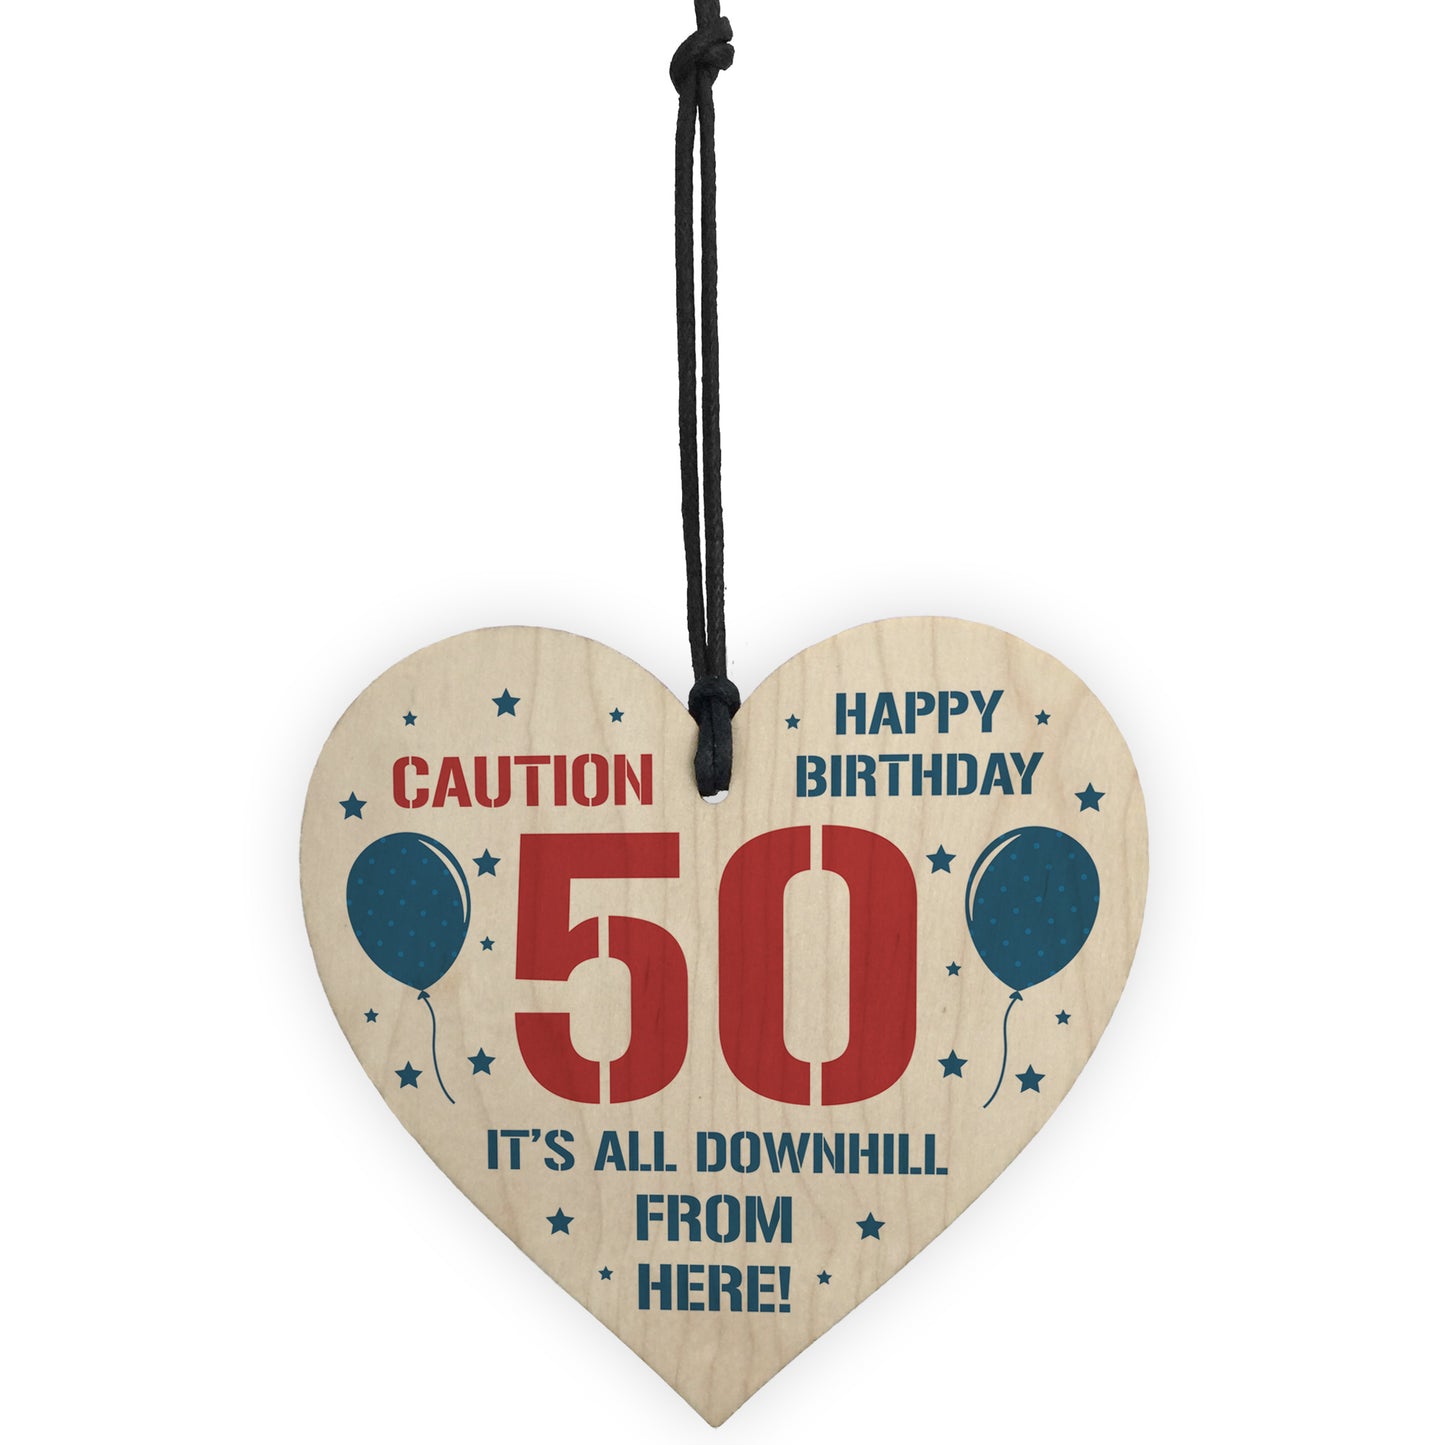 Funny 50th Birthday Gifts Novelty Wood Heart Gift For Him Her